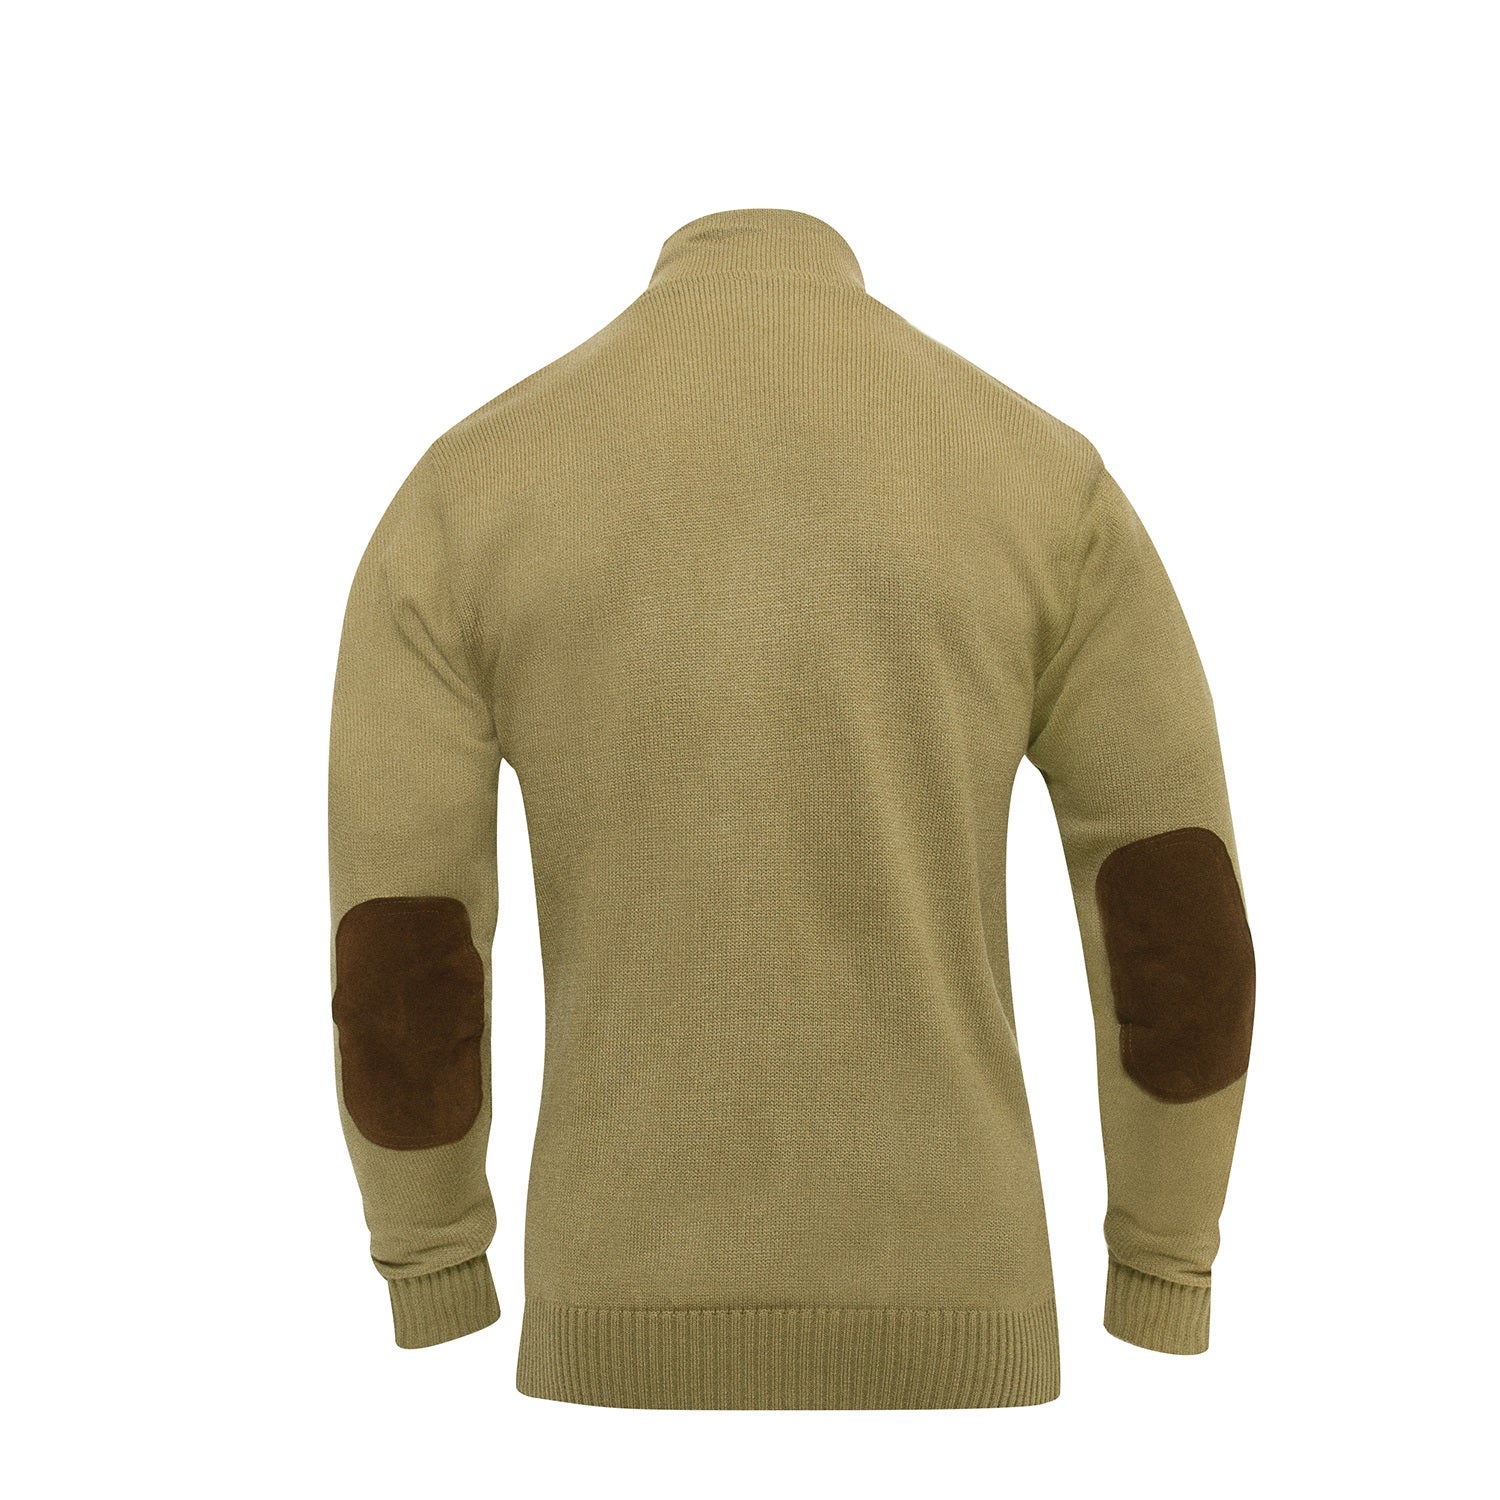 Rothco 3-Button Sweater With Suede Accents Khaki